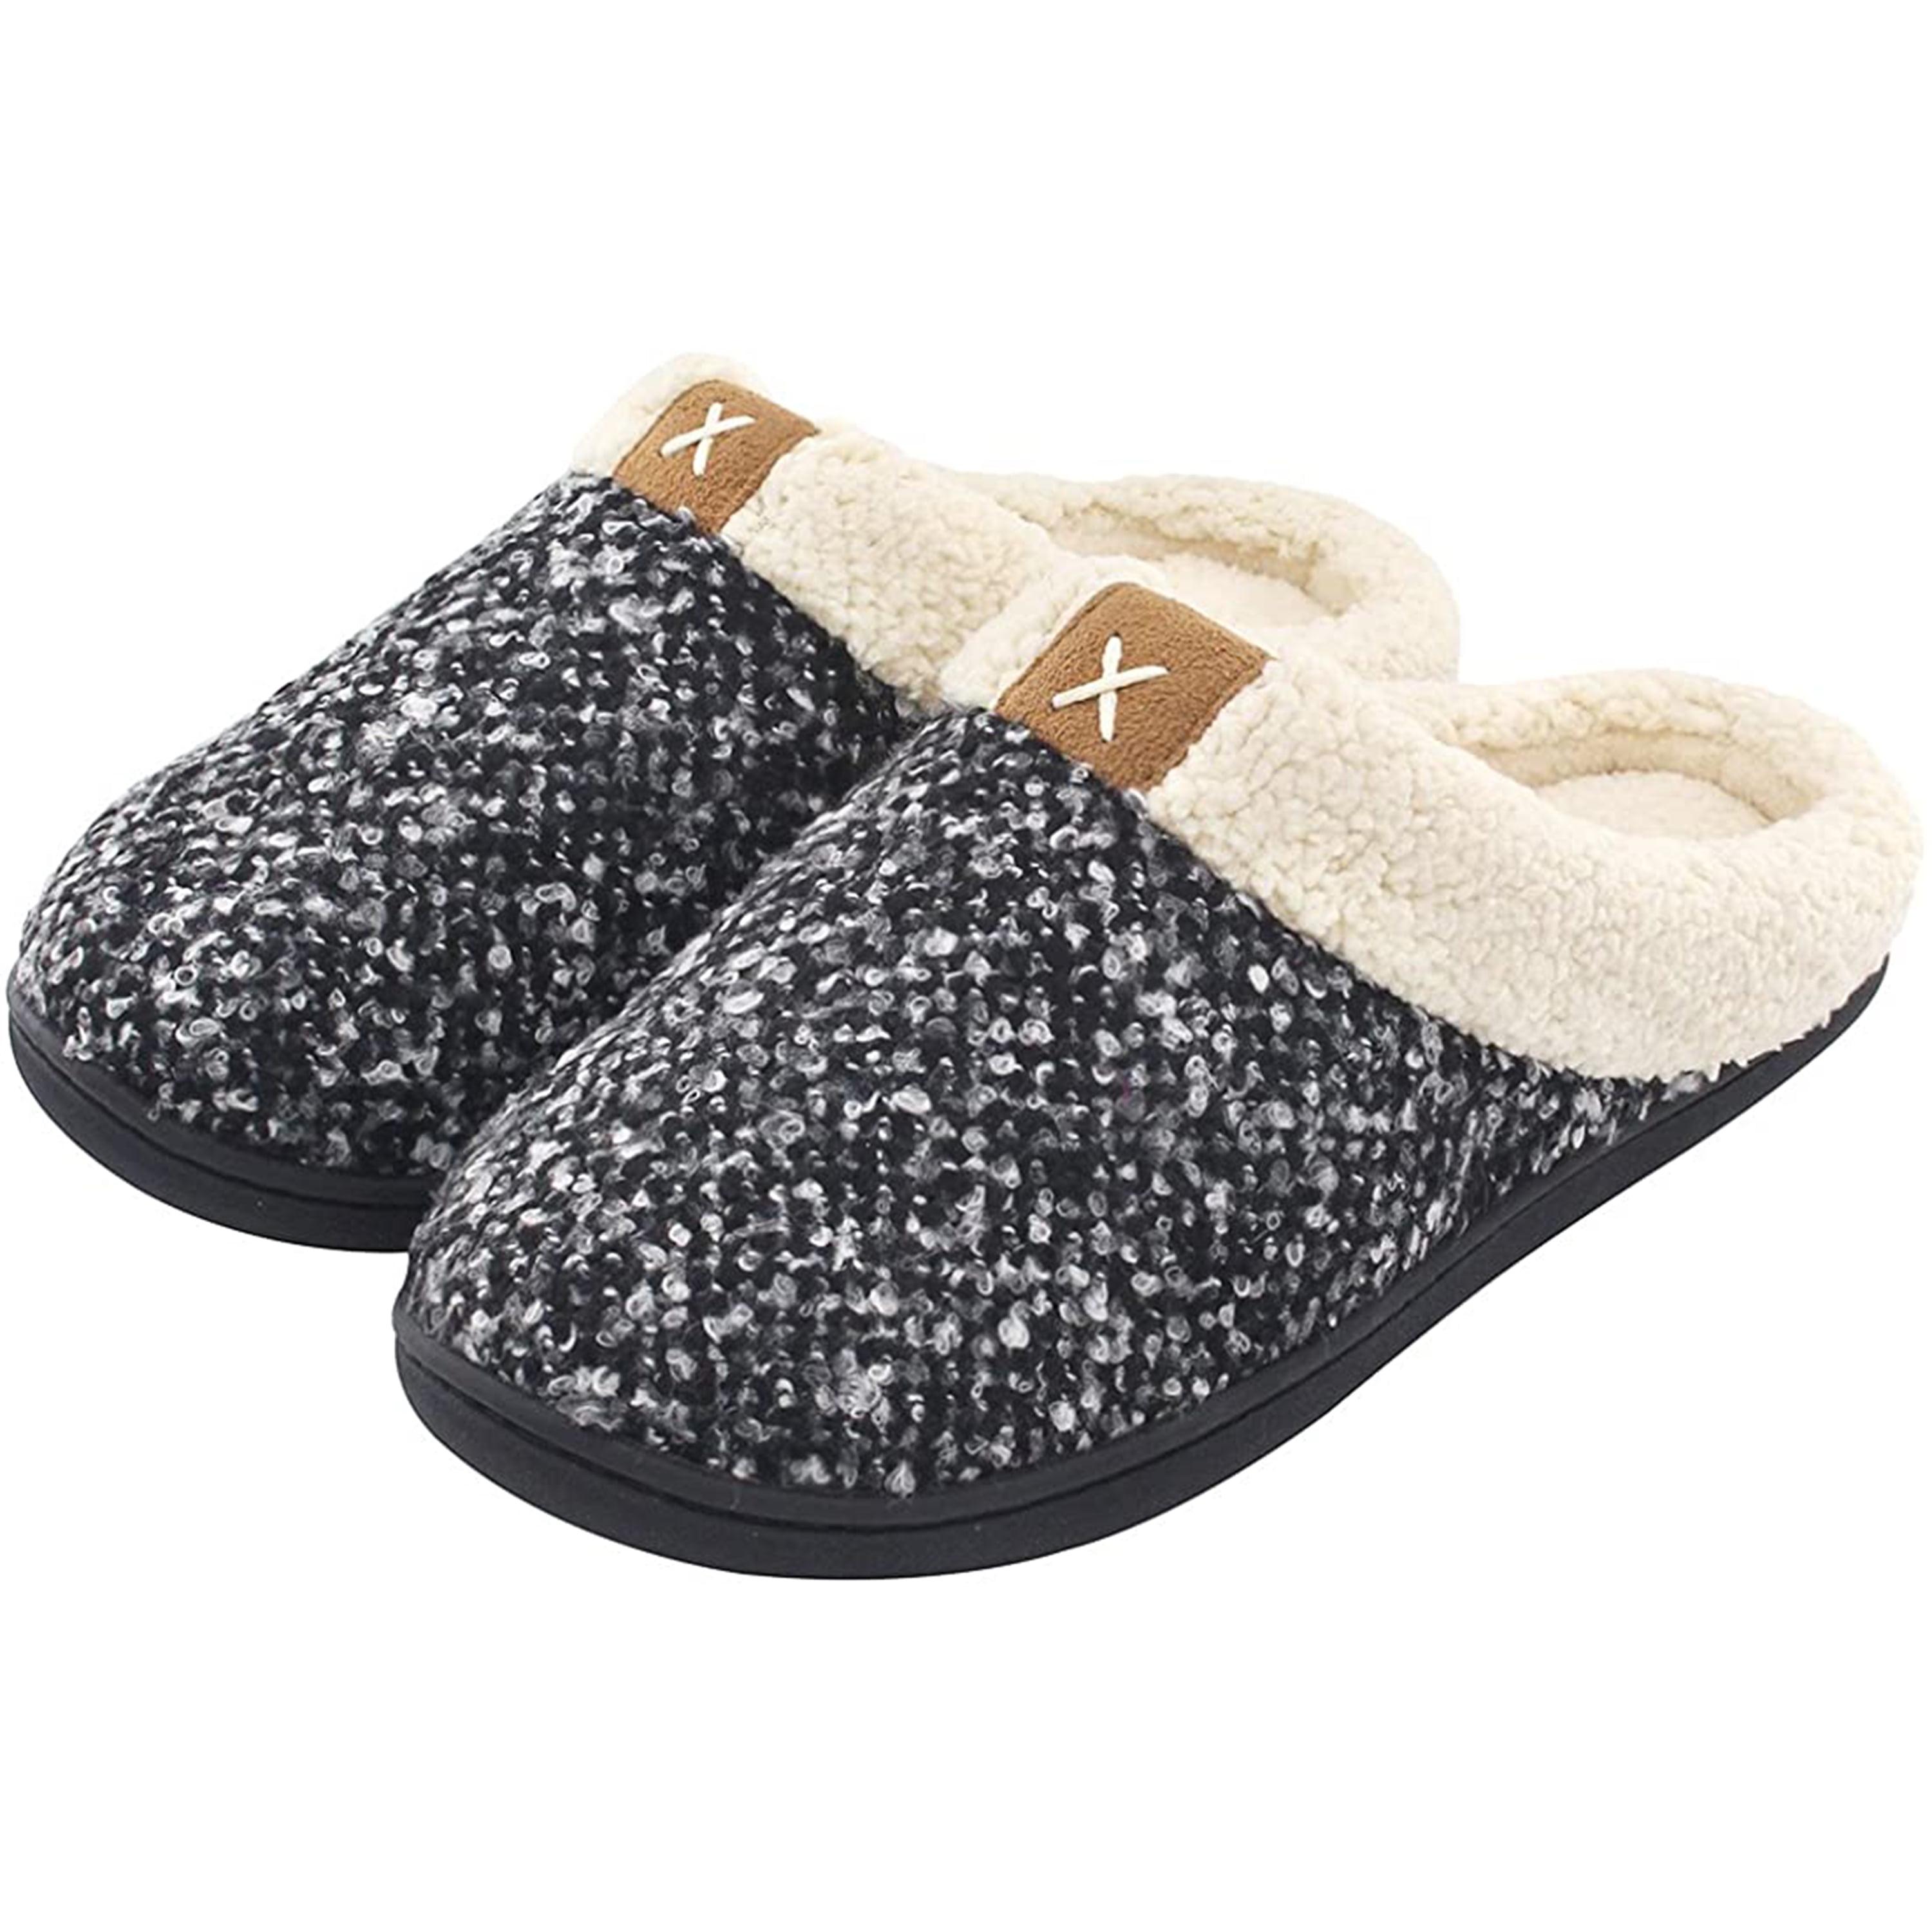 Homitem Men's Cozy Memory Foam Slippers,Fuzzy Wool-Like Plush Fleece Lined House Slippers Men Indoor Outdoor Slippers with Anti-Skid Rubber Sole 